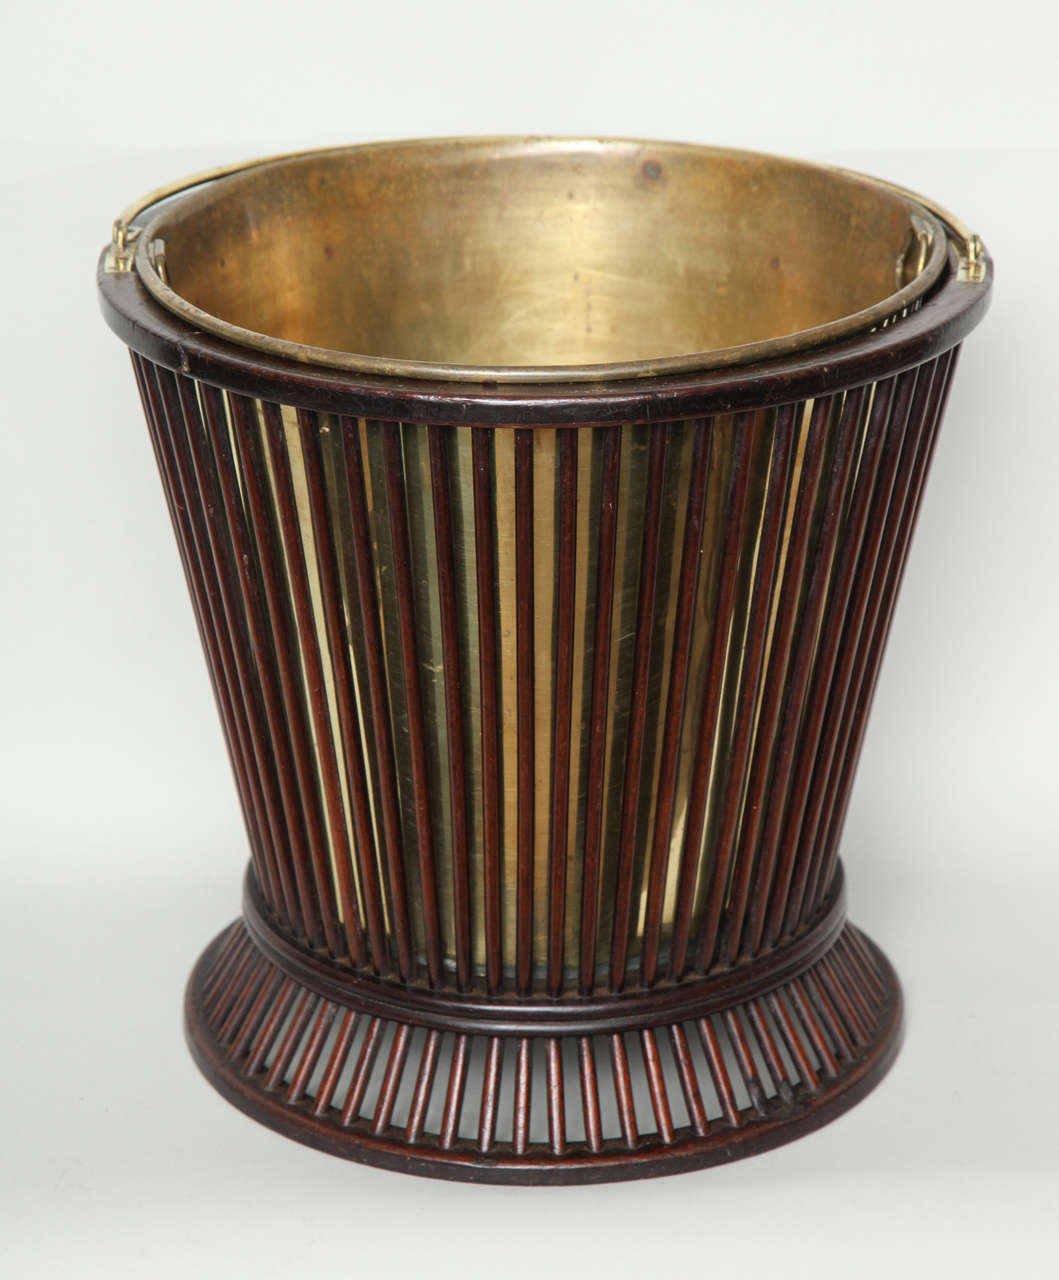 Unusual Georgian mahogany peat bucket with brass bail handle and liner, the rim, waist and base turned from the solid, the tapered body and flared base entirely made from turned mahogany rods, the whole with good color.
Perfect as a waste paper